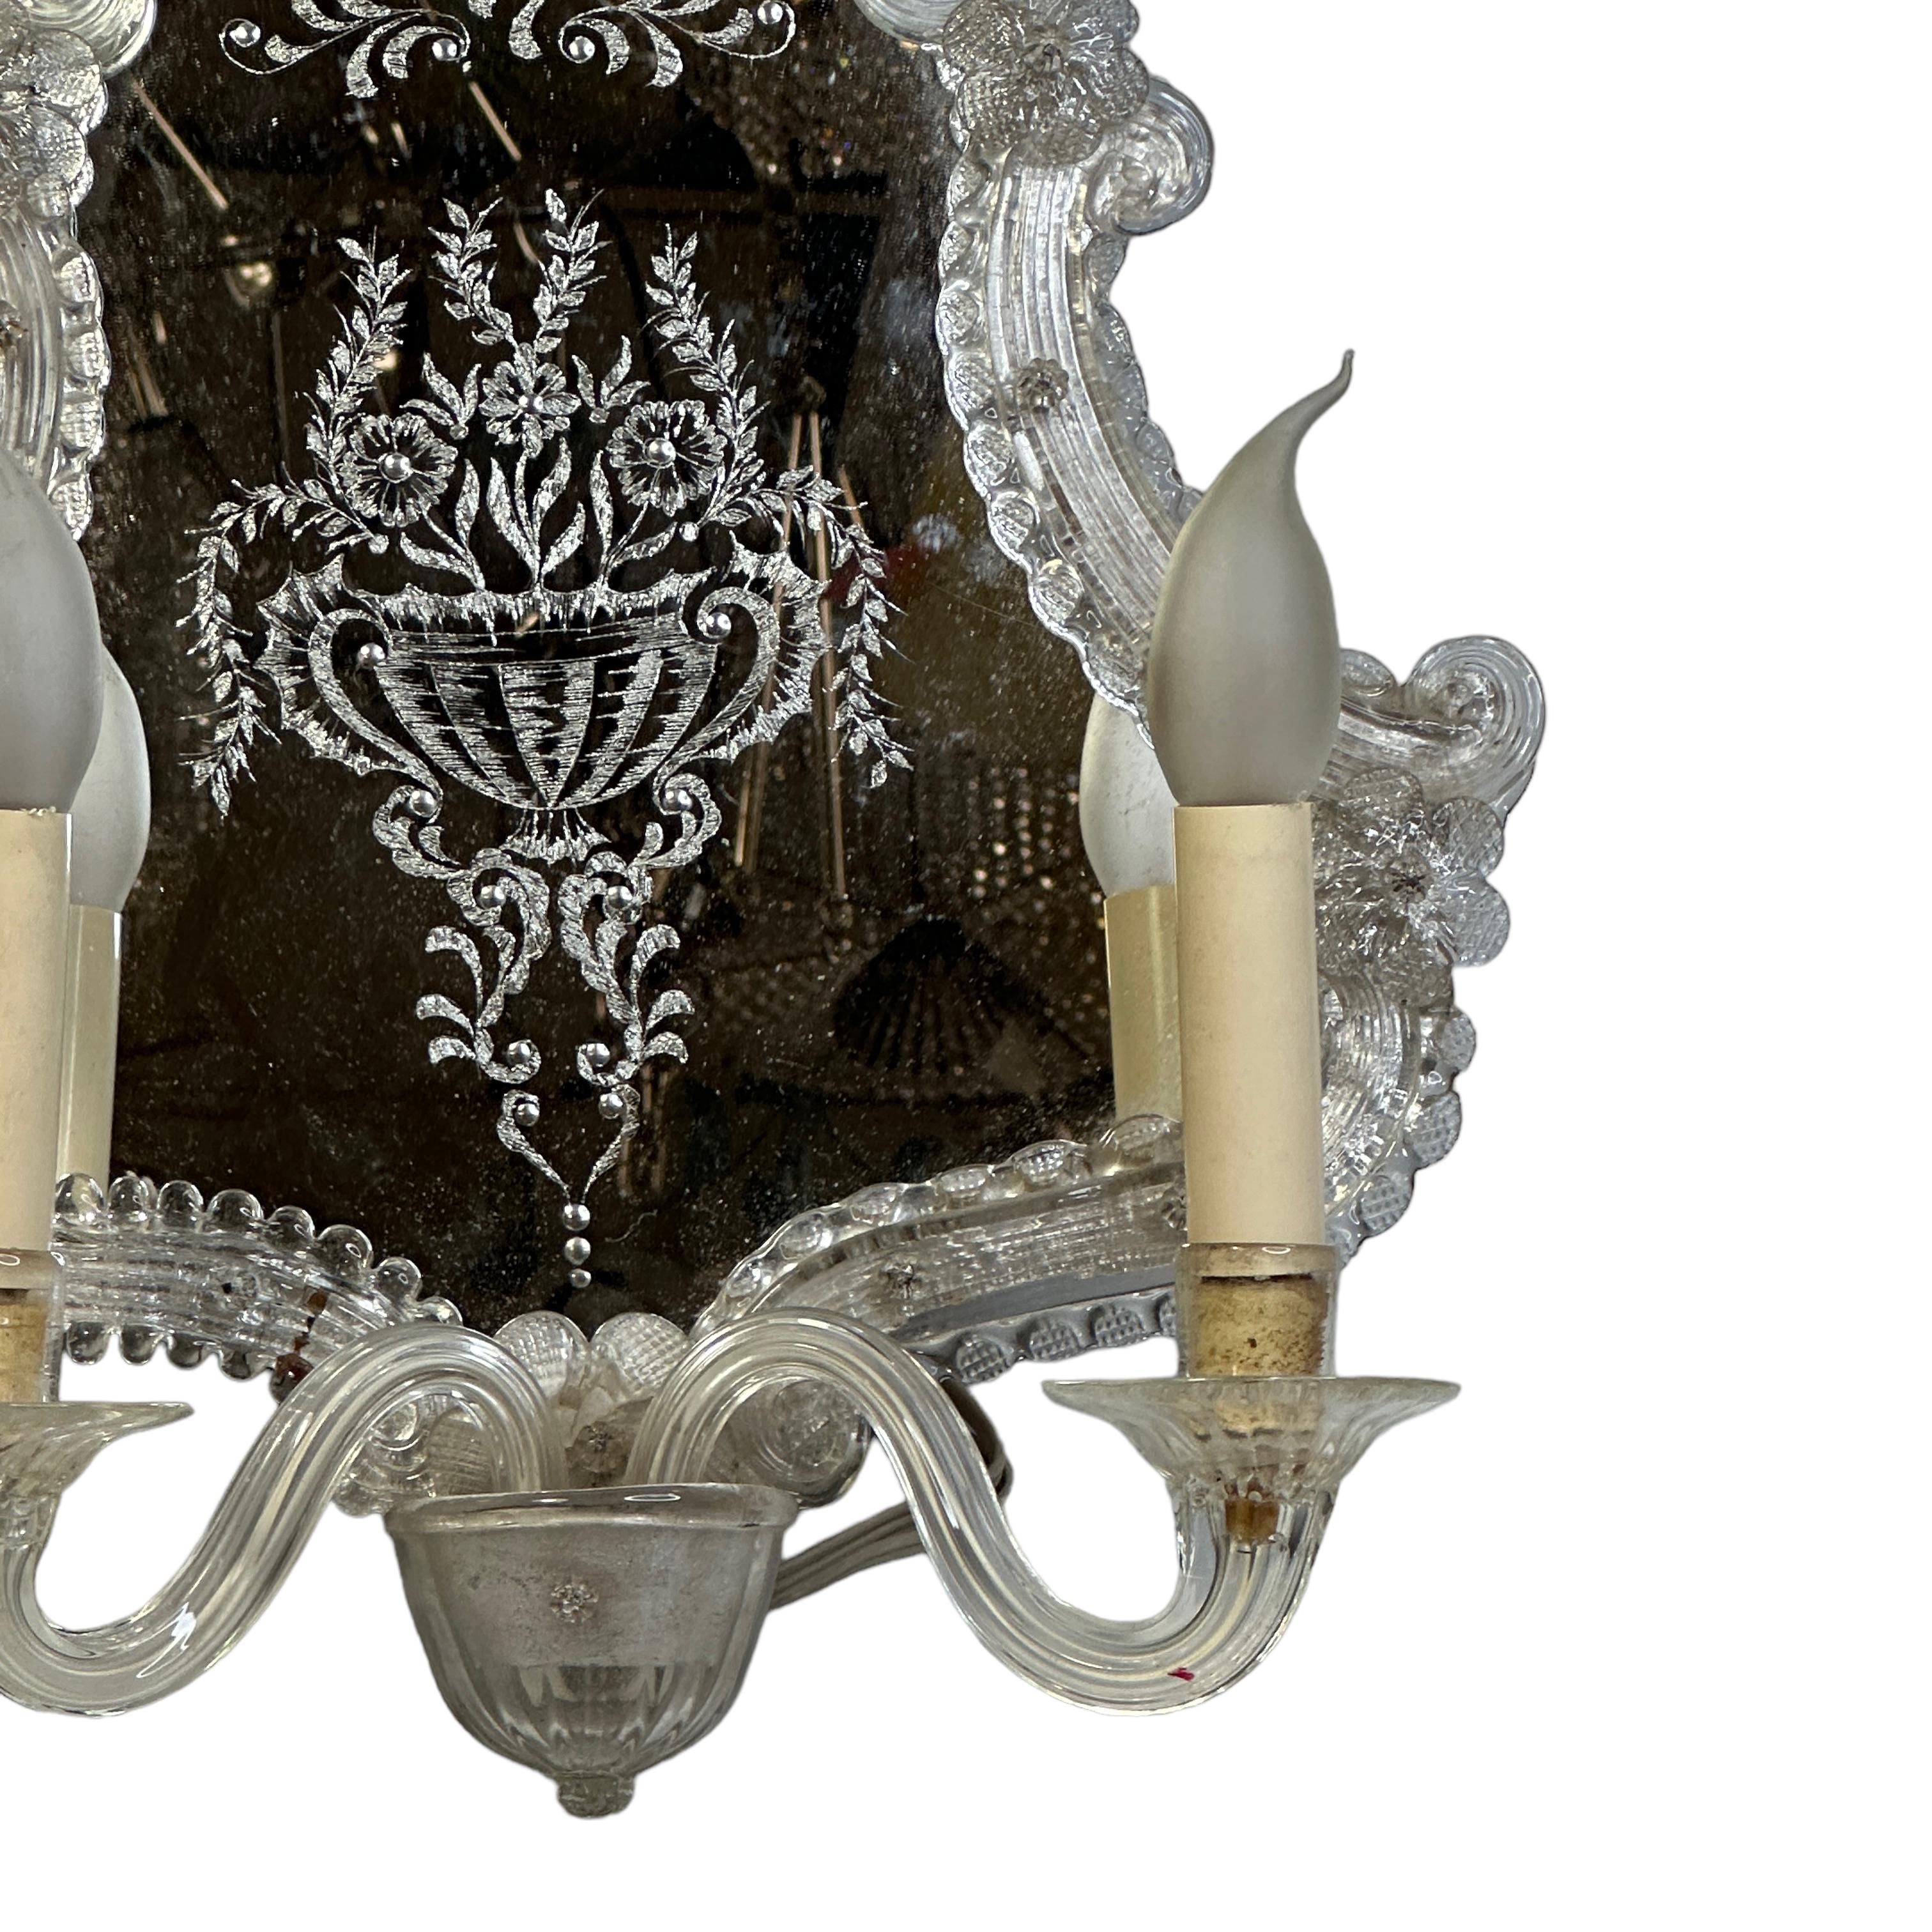 Hollywood Regency Venetian Etched Murano Glass Mirror Sconce, circa 1950s Italy Vintage For Sale